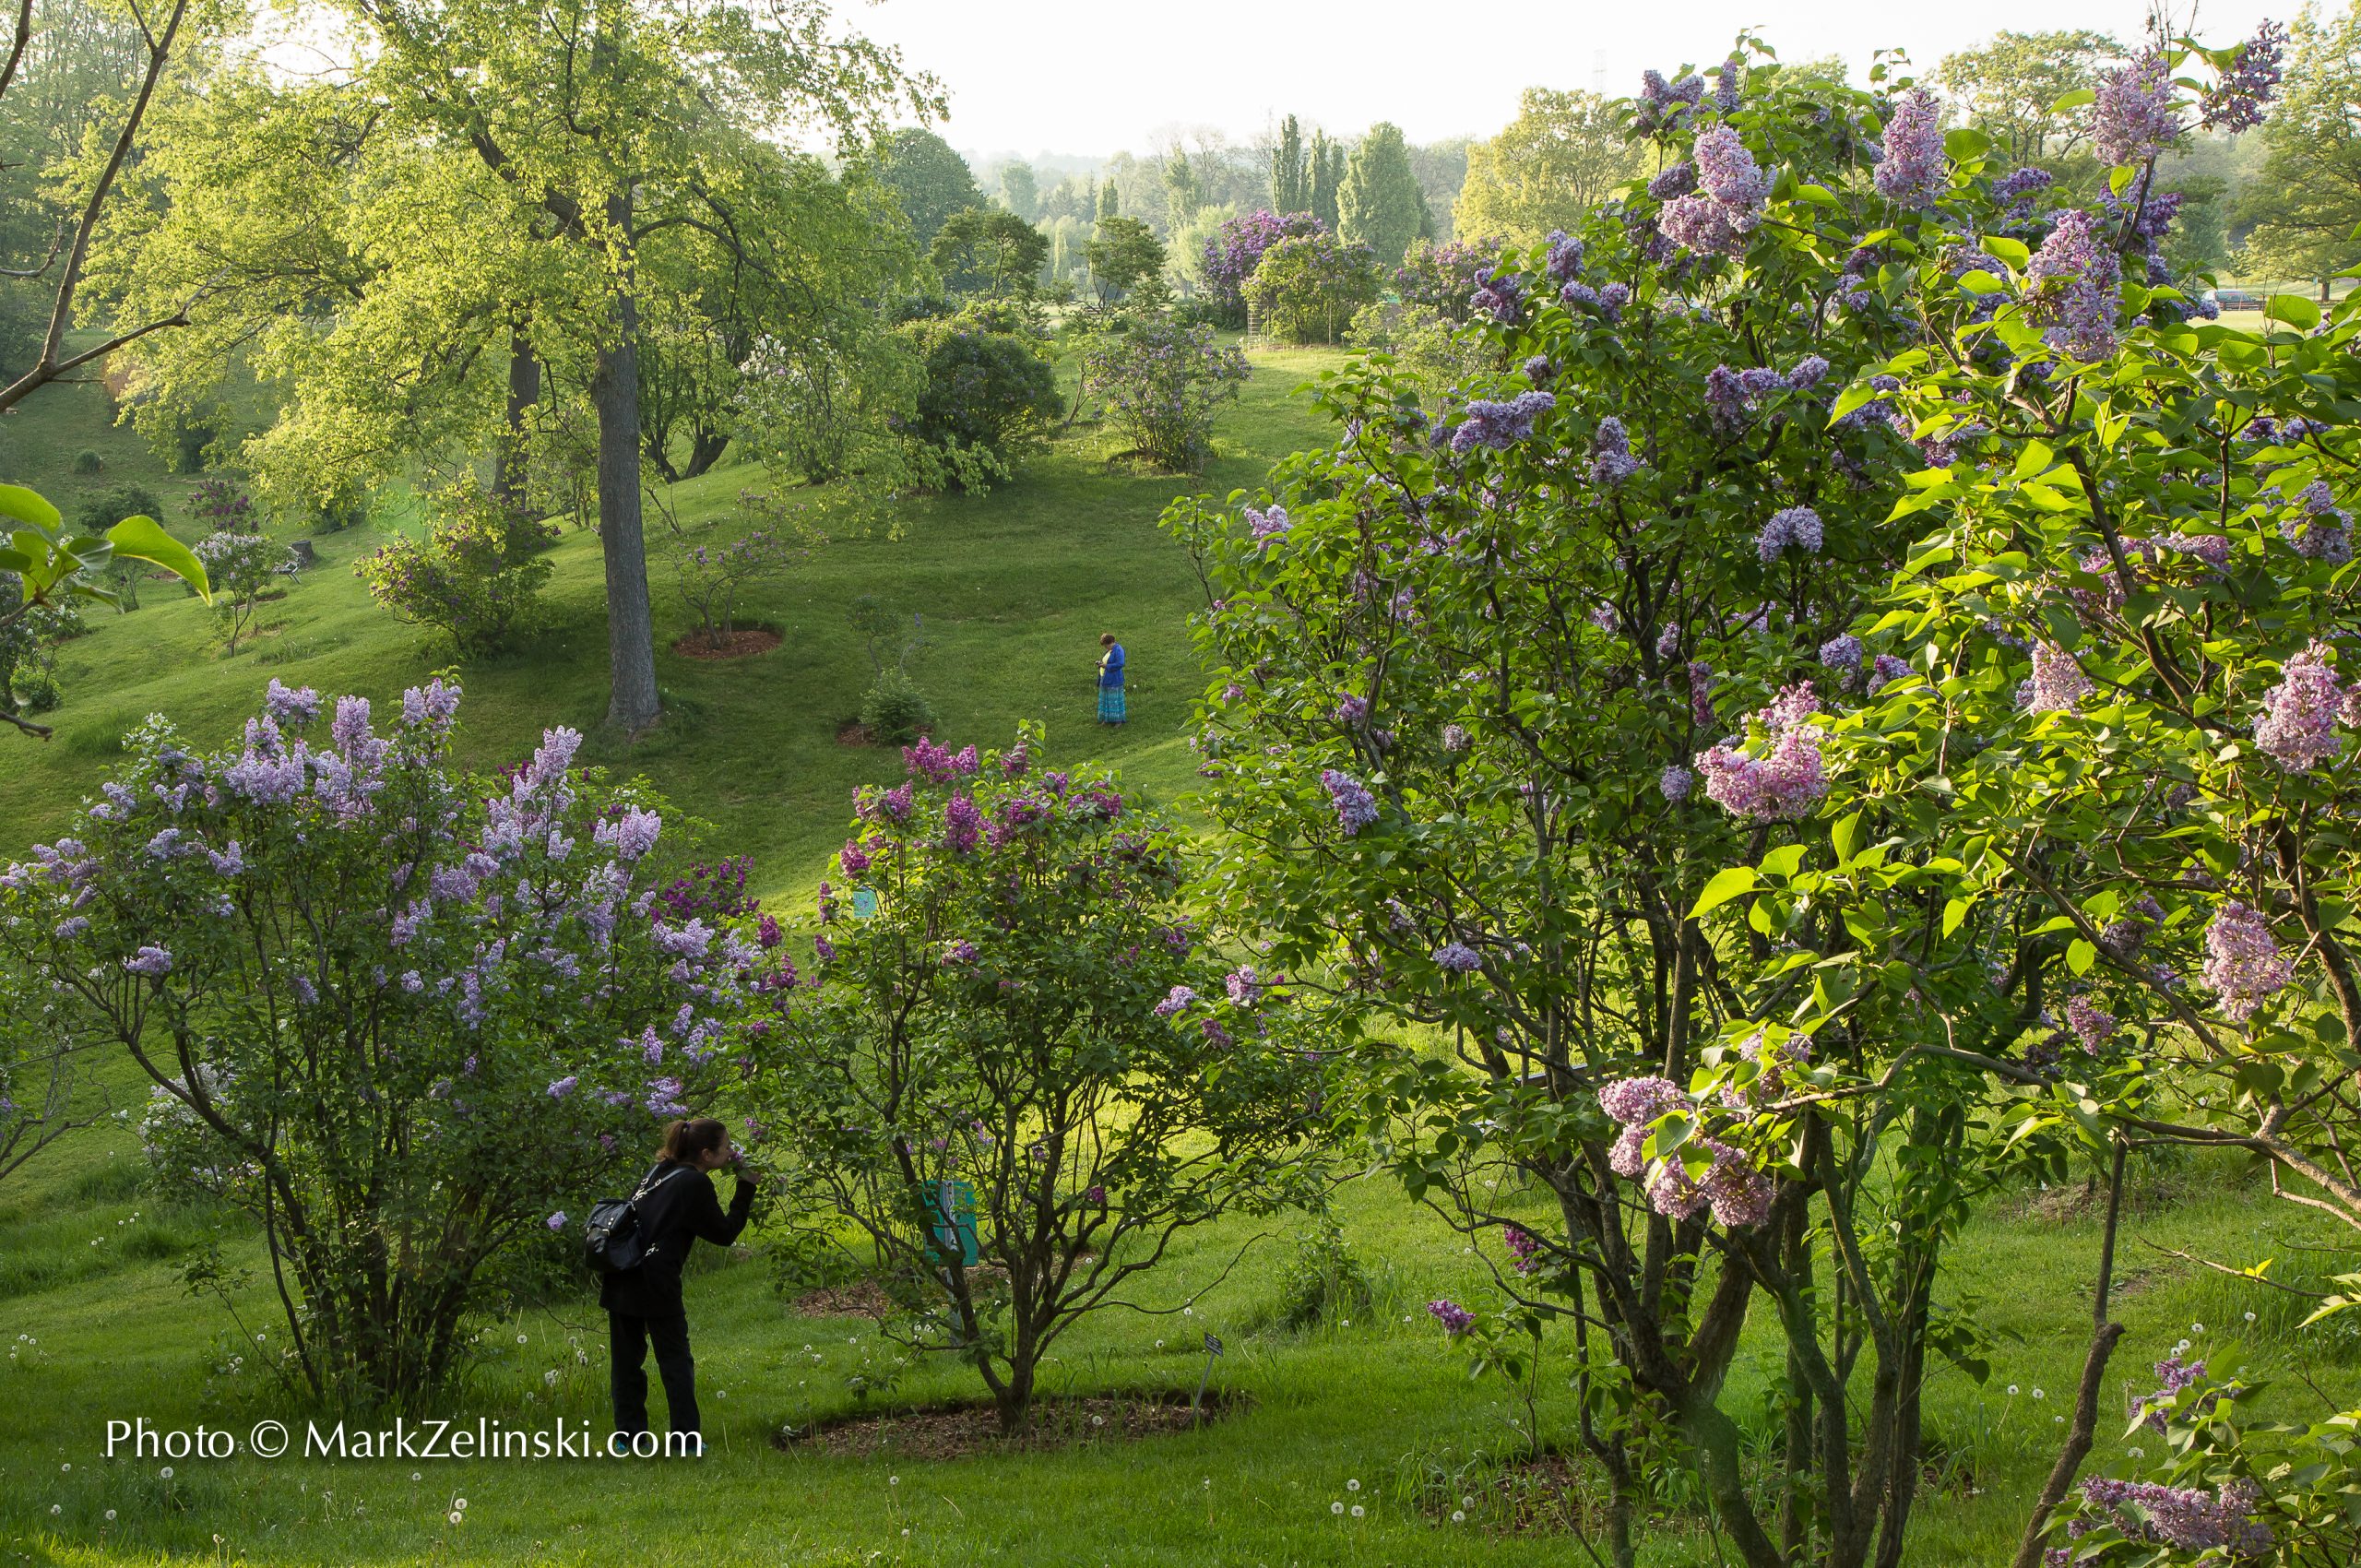 visitors roaming throughout the lilacs and smelling the flowers